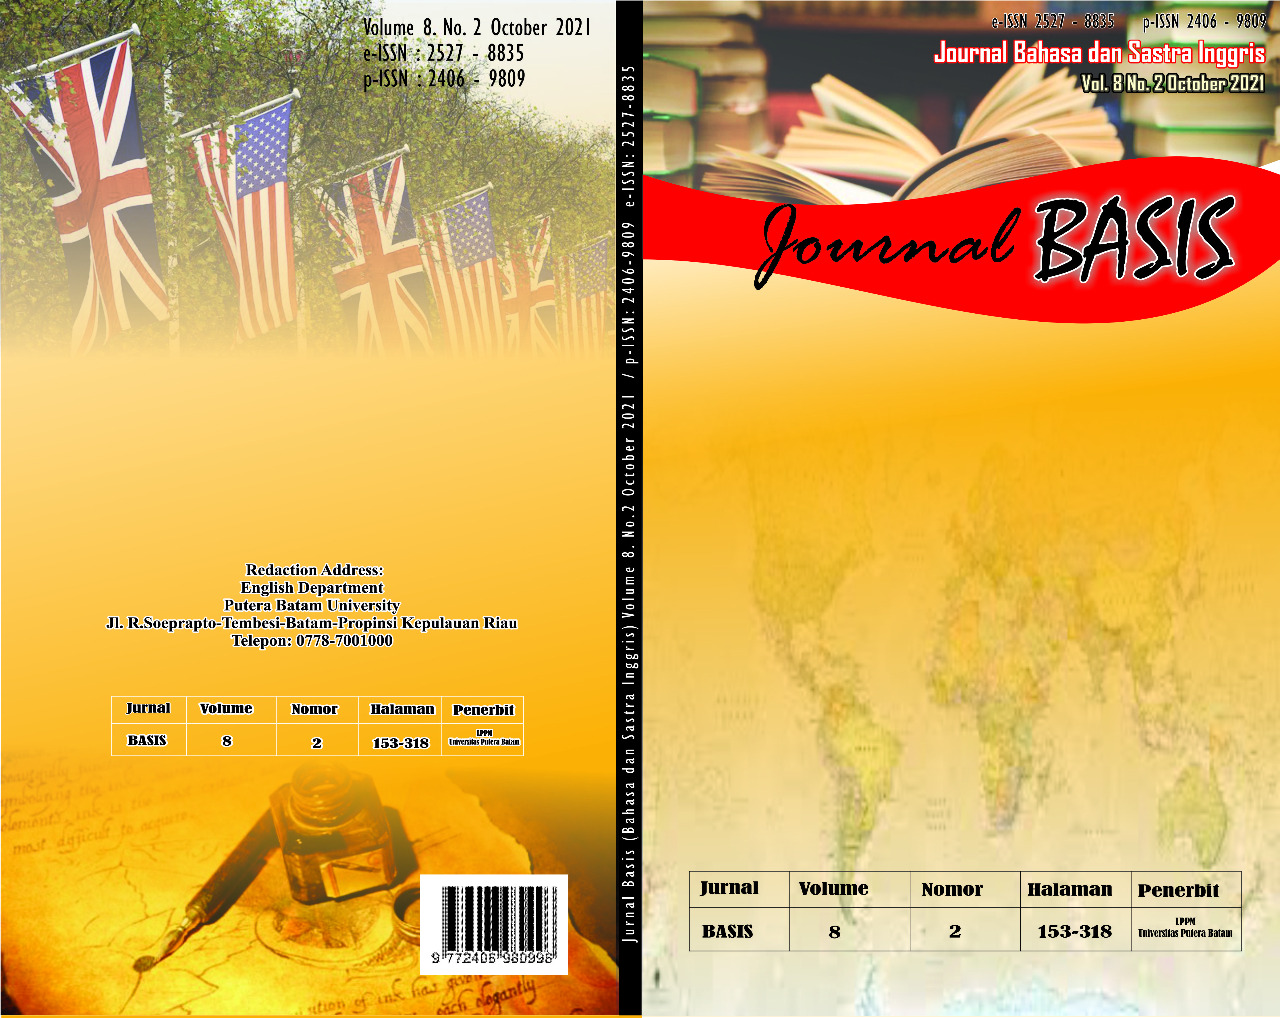 Basis: Jurnal Bahasa dan Sastra Inggris (e-ISSN : 2527- 8835, p-ISSN : 2406 – 9809) in our webstite link http://ejournal.upbatam.ac.id/index.php/basis) is a peer-reviewed journal published biannually by English Literature department, Putera Batam University, Kepulauan Riau- Indonesia. The journal publishes research paper in the field of linguistics, literature, and language teaching, such as Feminist approach in literature, sociological approach ,Poscolonialism, Strucutralism, and post structuralism, Popular literature, fundamental of ELT, the sound of word of language, structure, meaning, language and gender, sociolinguistic, language philosophy, historical of linguistic, origin/evolution, experimental linguistics, phonology, syntax, endangered minority language, language and nature, communicative strategy of teaching, linguistic anthropology, psychology of language, field methods in linguistic, interactive of language teaching.  This journal is an open access journal which means that all content is freely available access without any of charge. Everyone  are allowed to read, download, copy, print, search, or link to the full texts of the articles, or use them for any other lawful purpose, without asking prior permission from the publisher or the author.